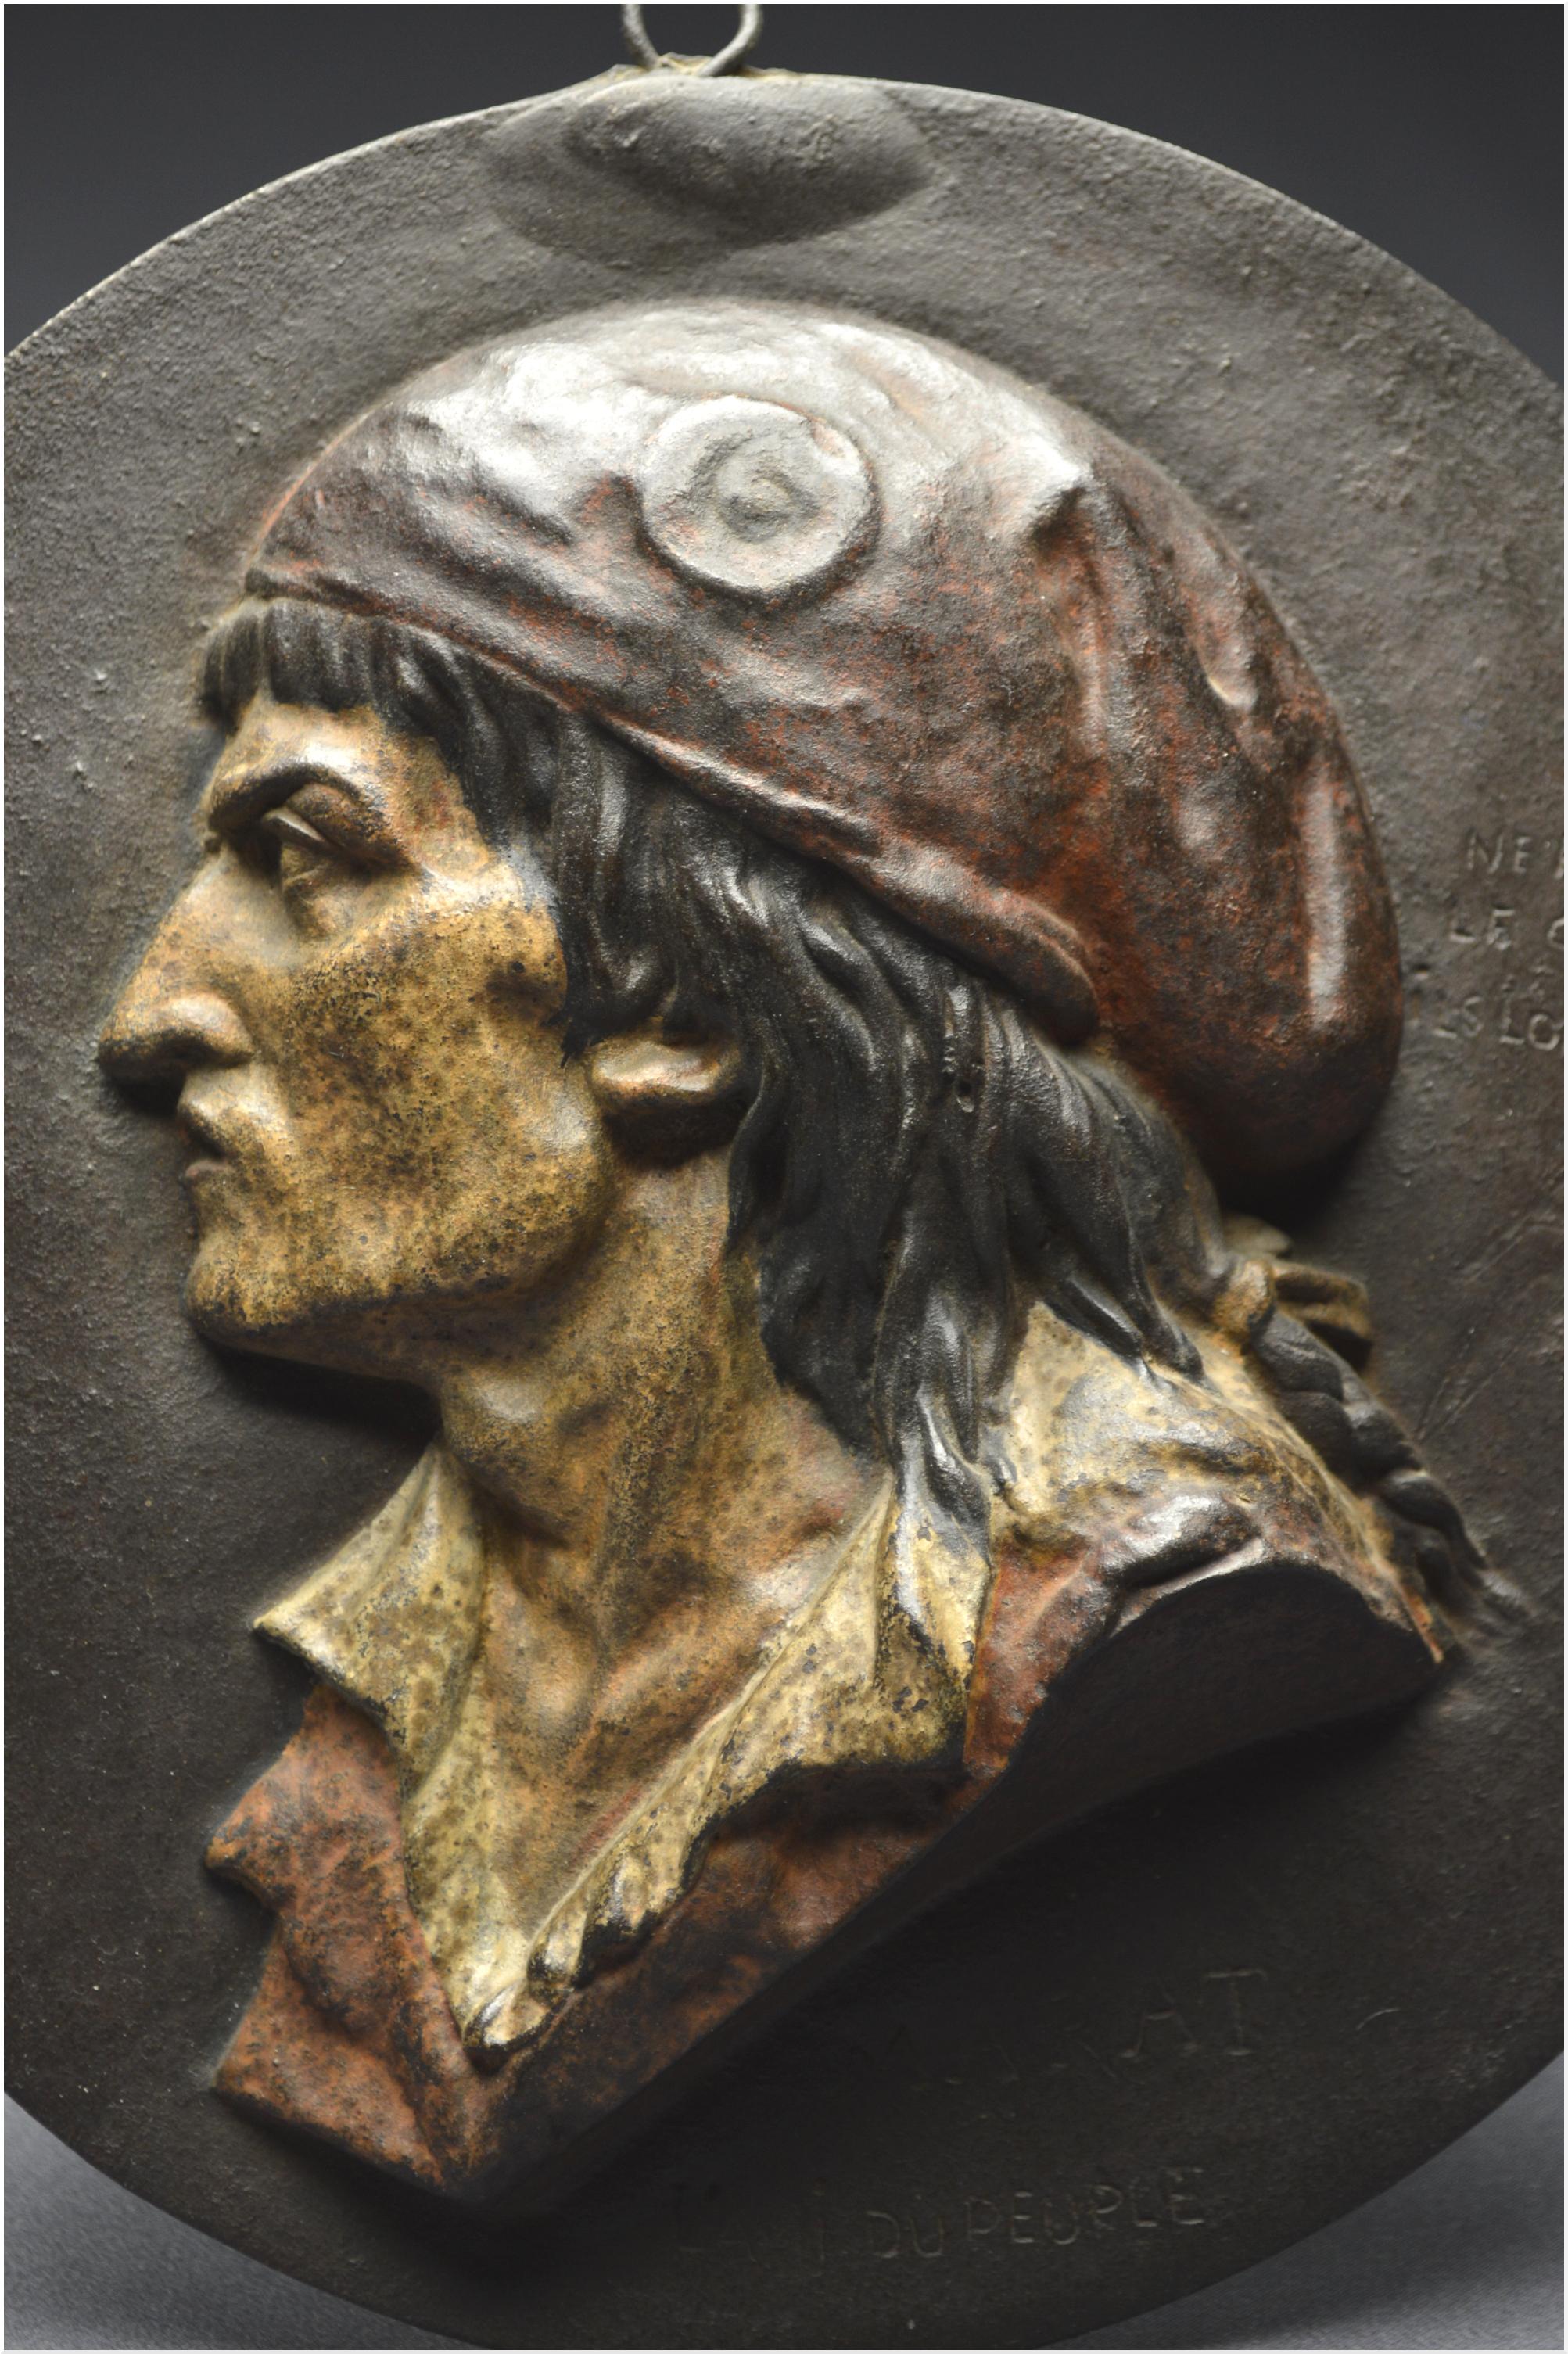 French Revolution, End of the 18th century, Rare polychrome bronze bas-relief representing Jean-Paul Marat

Revolutionary period, after 1793


Rare polychrome bronze representation of the famous revolutionary Jean-Paul Marat. Represented in